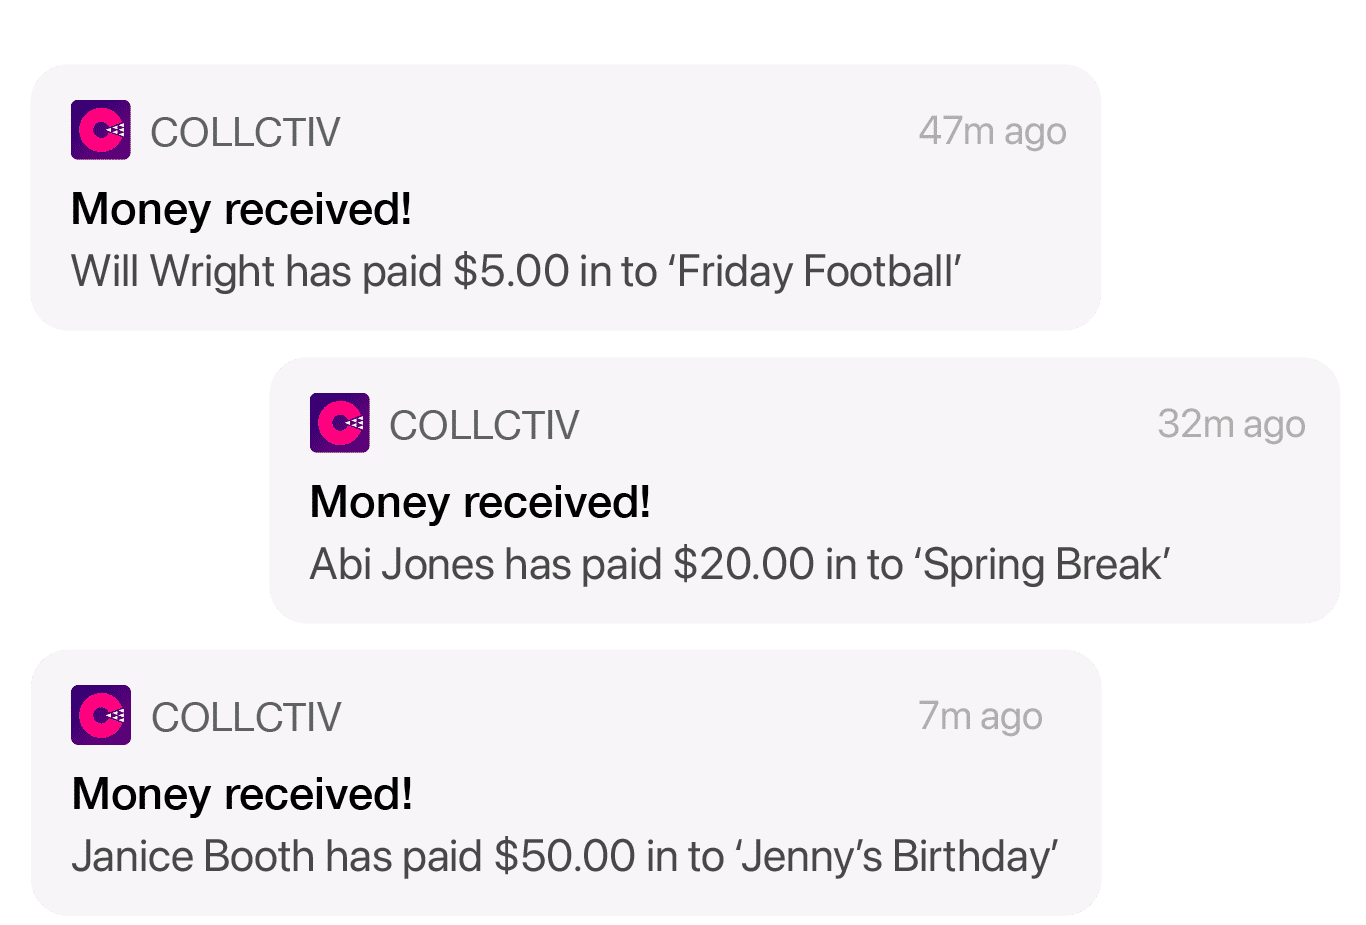 Notifications of money being received